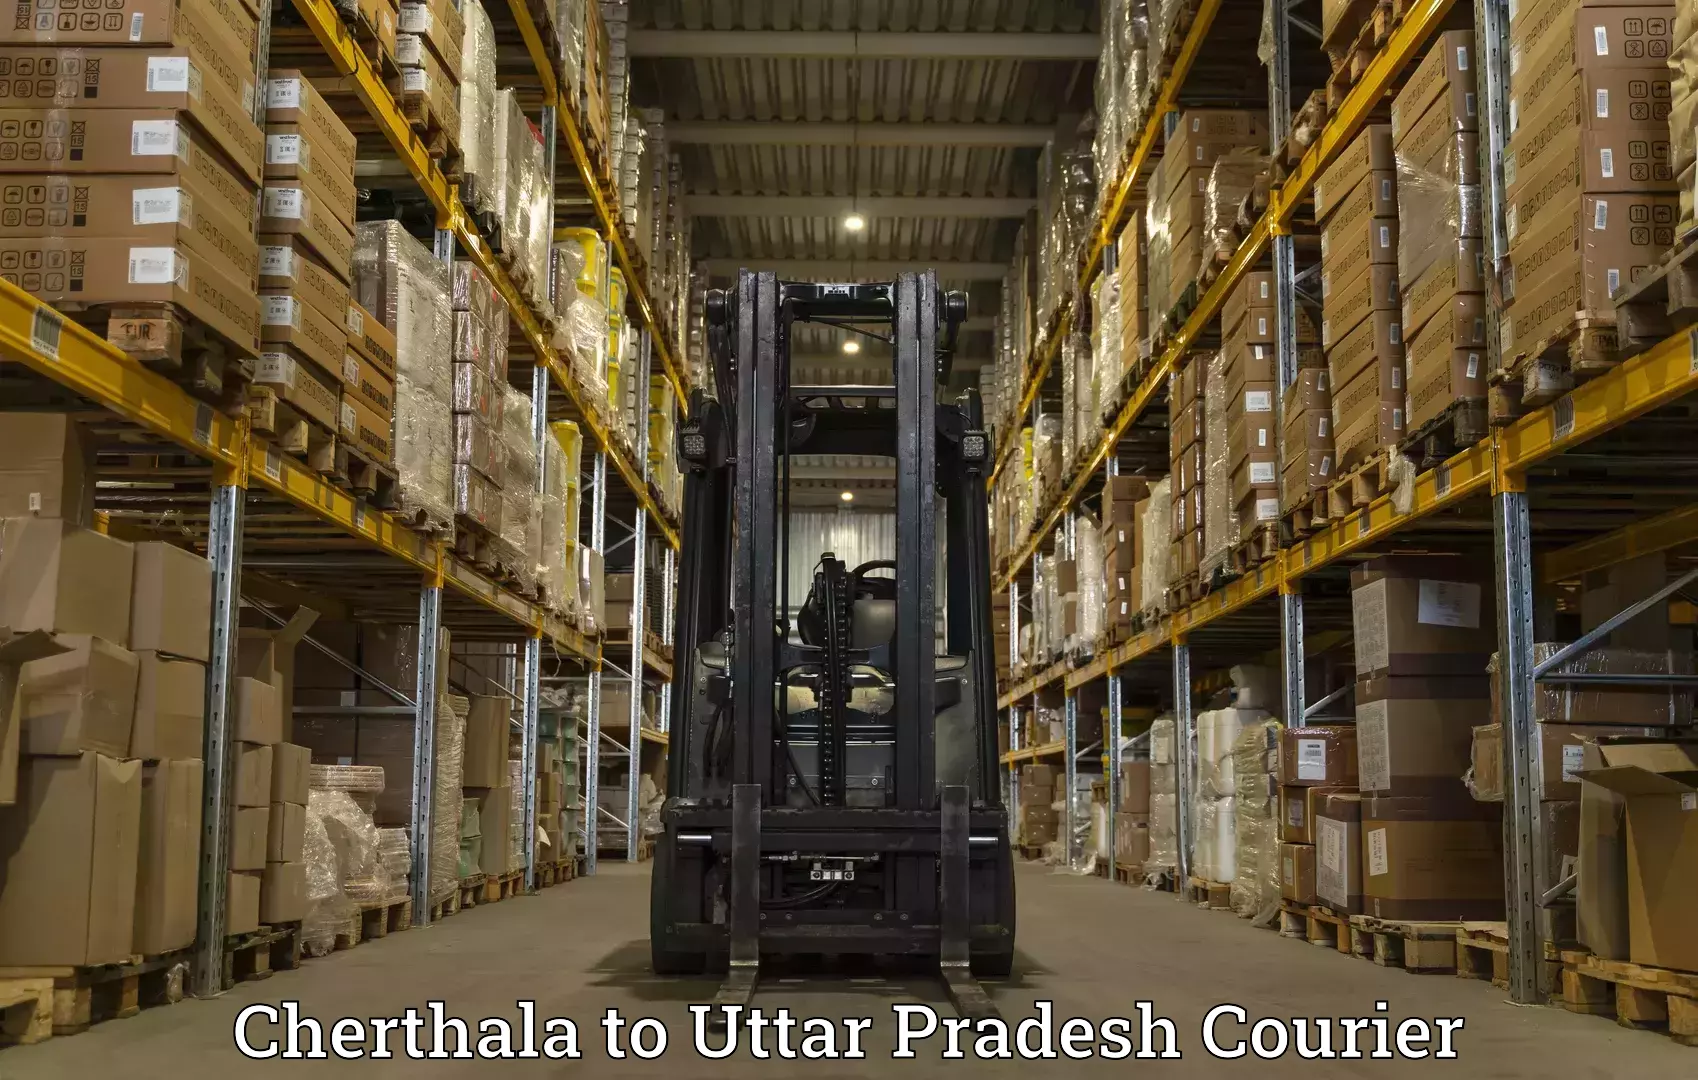 Express delivery capabilities Cherthala to Agra